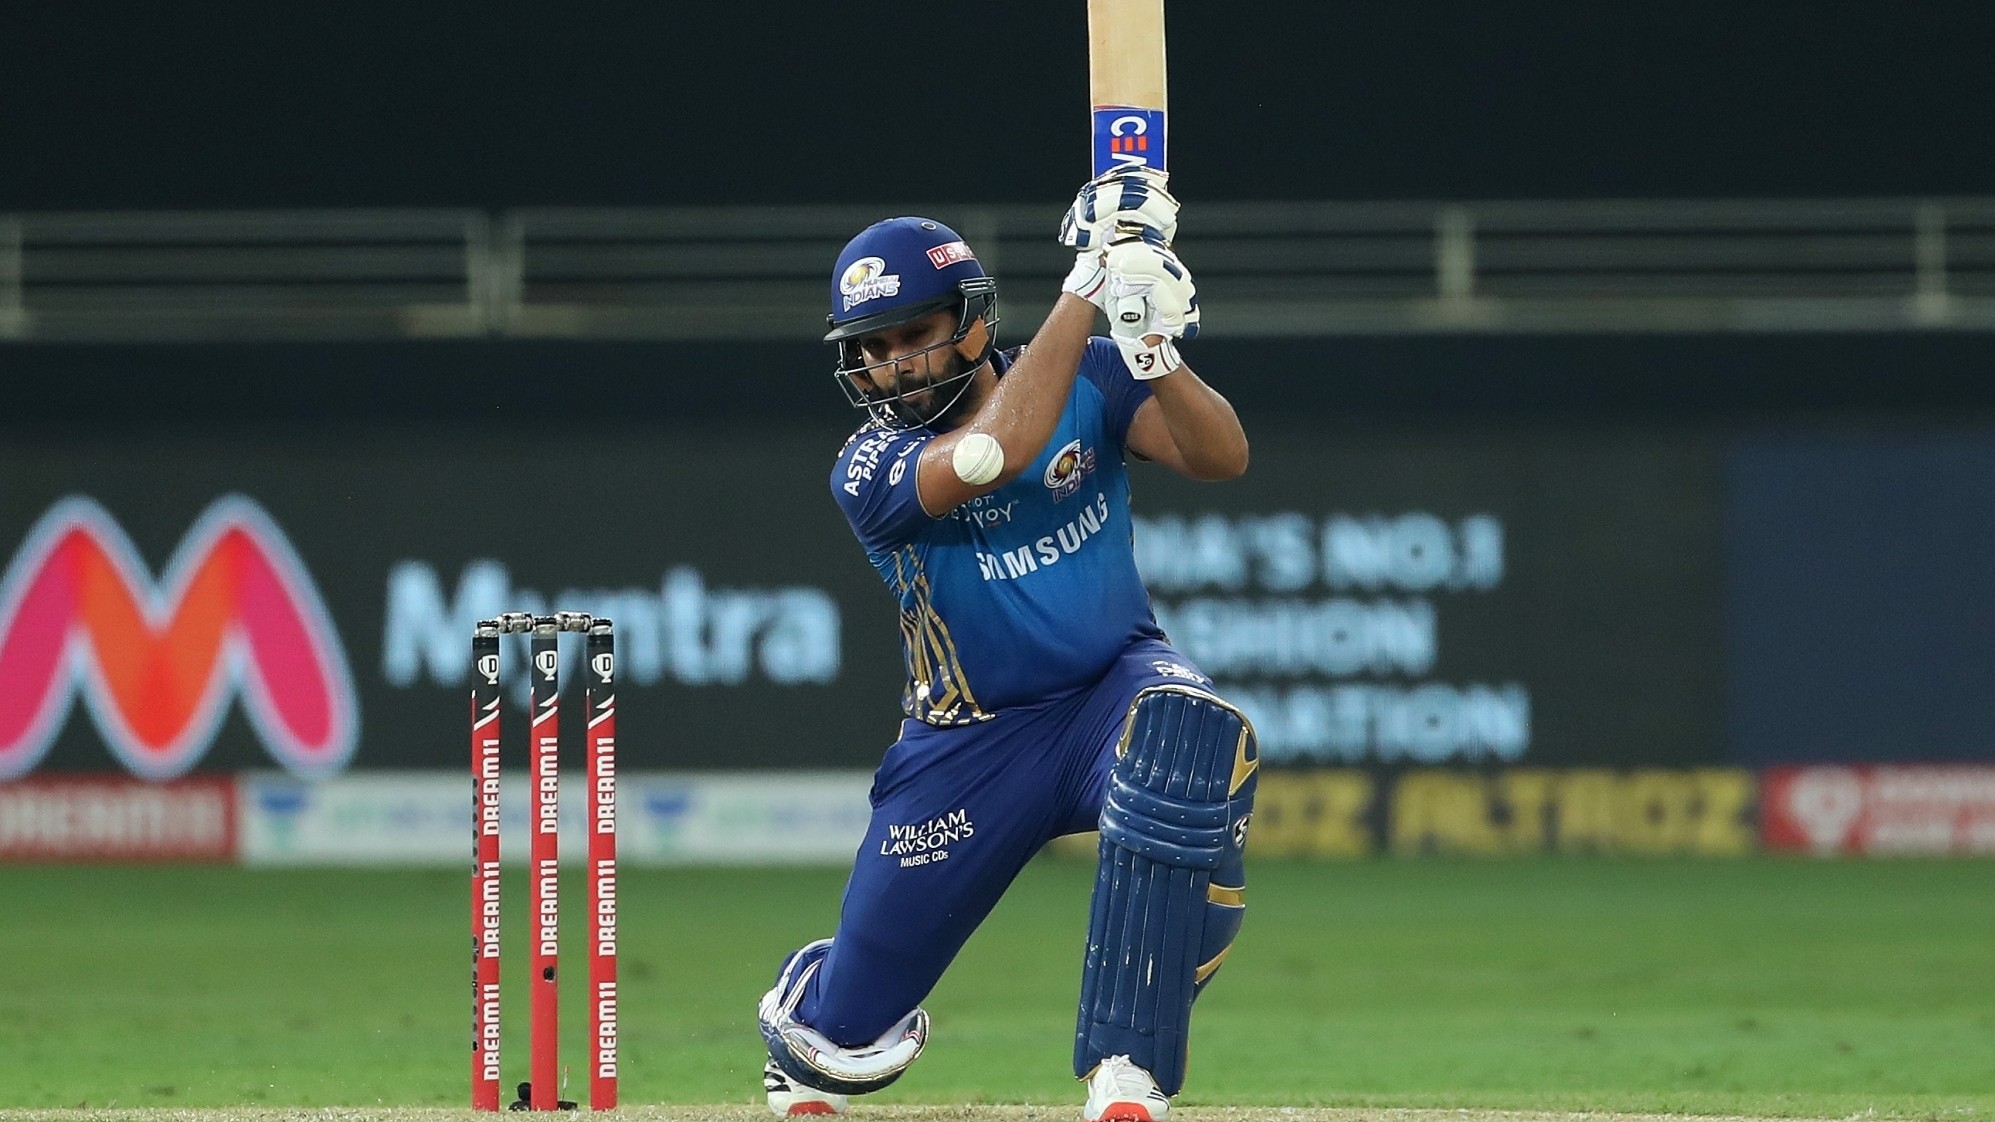 IPL 2020: “This is and always will be my home”, Rohit Sharma after his 150th appearance for Mumbai Indians